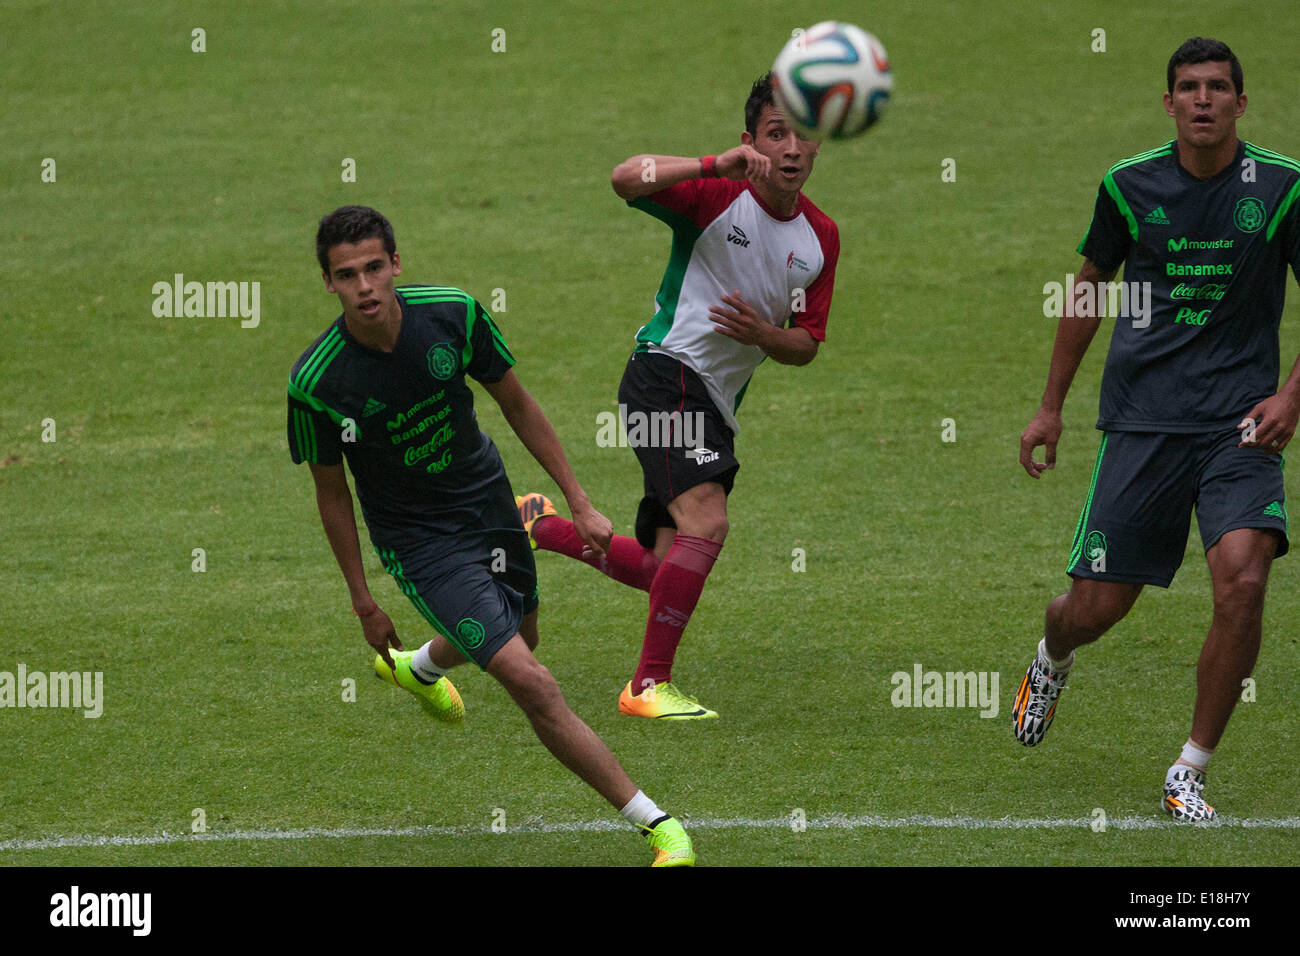 Mexico City, Mexico. 26th May, 2014. Players Diego Reyes (L) and Francisco Rodriguez (R) of Mexico's national soccer team, take part in a training session before the Brazil 2014 FIFA World Cup, in the Azteca Stadium, in Mexico City, capital of Mexico, on May 26, 2014. Credit:  Pedro Mera/Xinhua/Alamy Live News Stock Photo